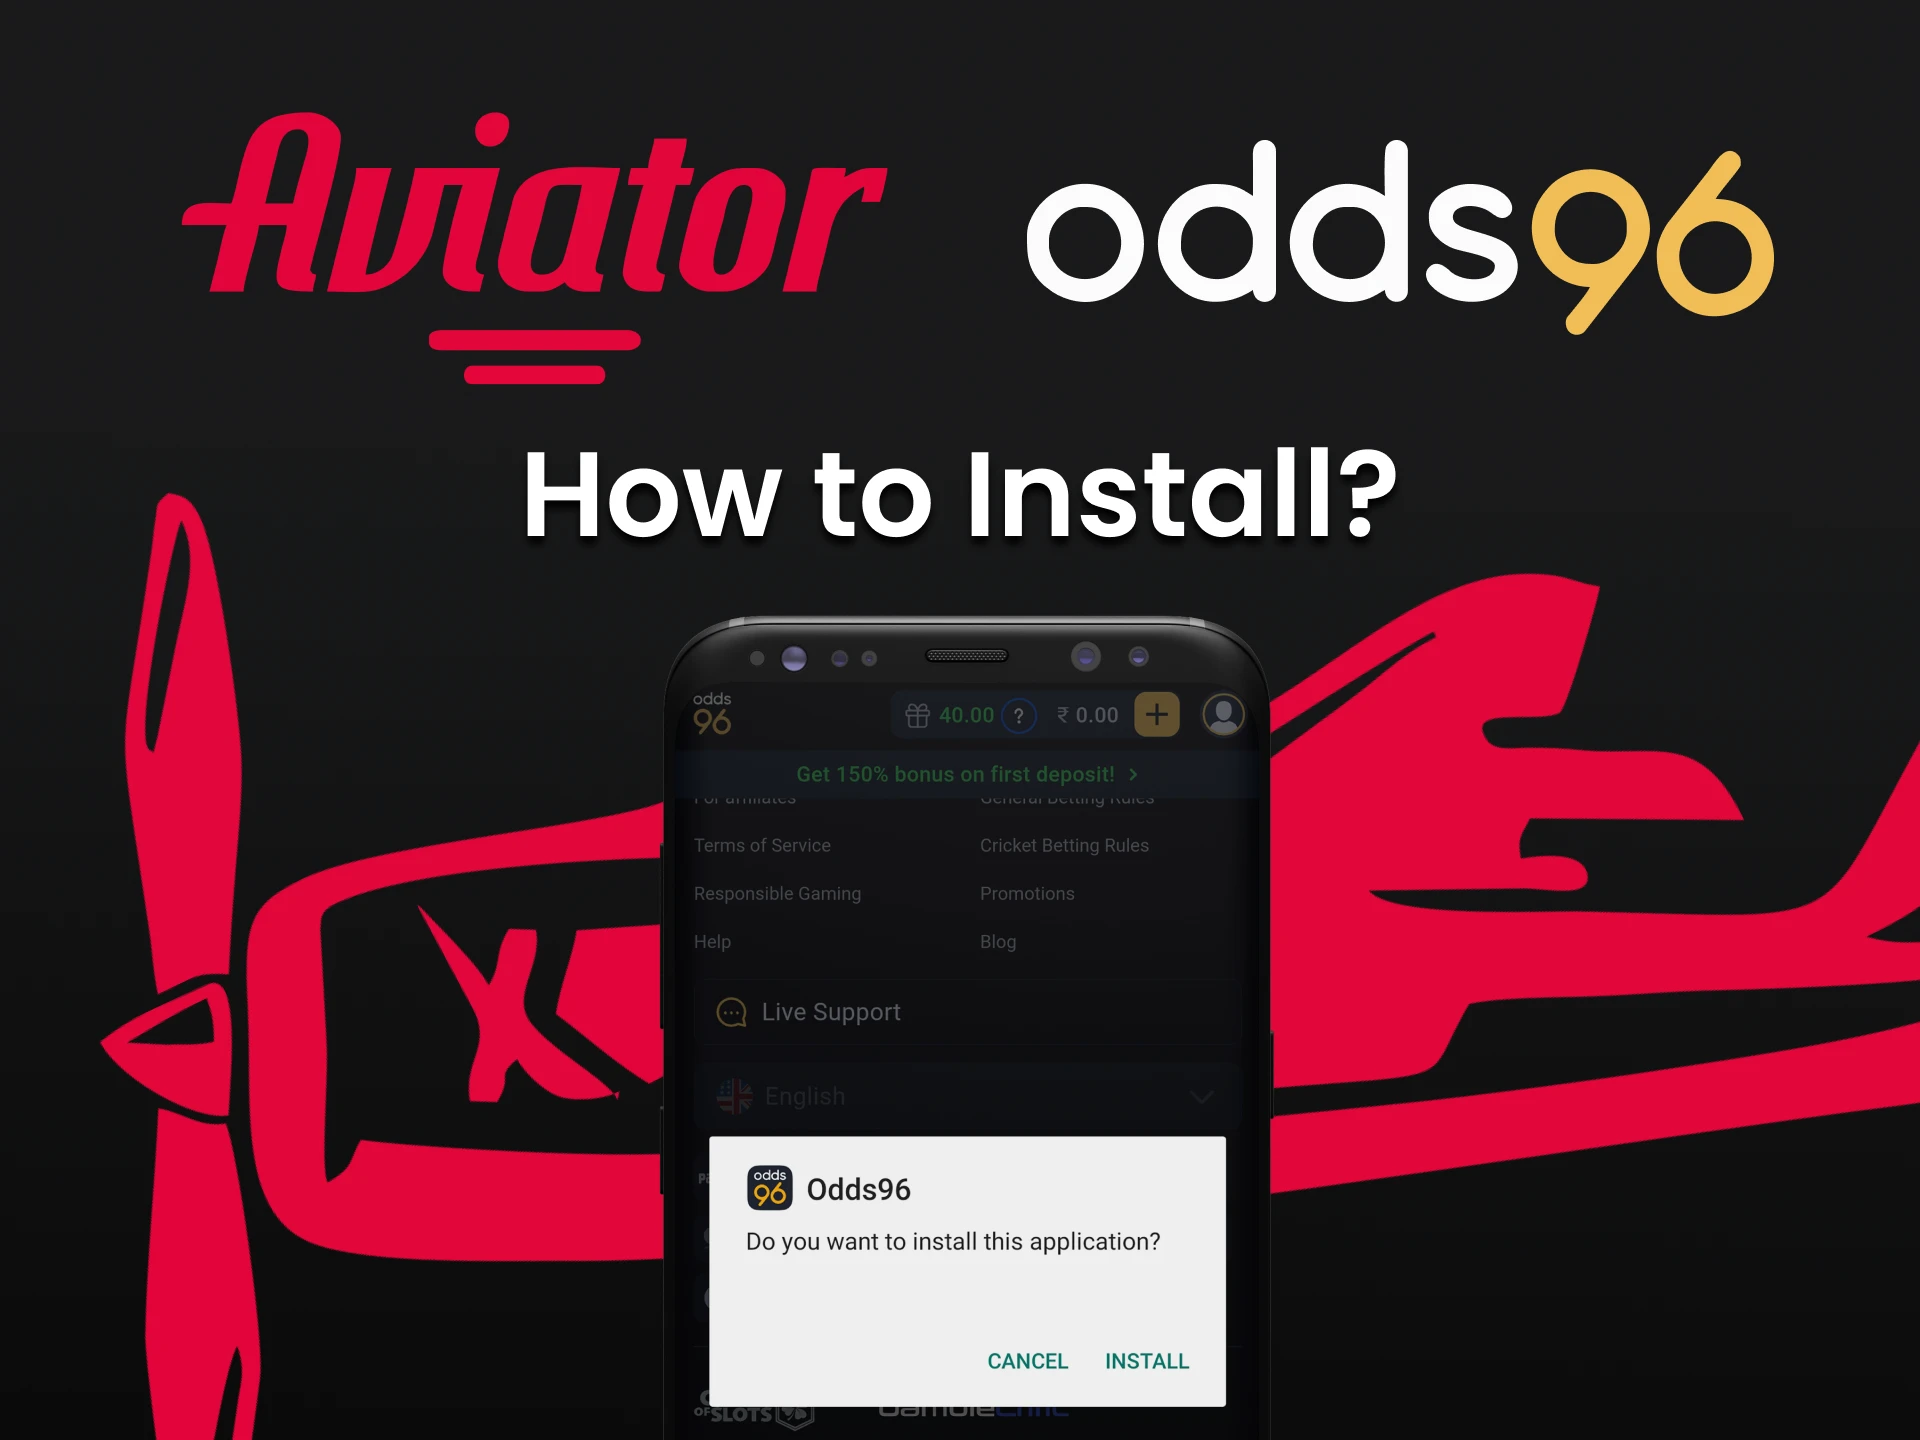 Install the Odds96 app to play Aviator.